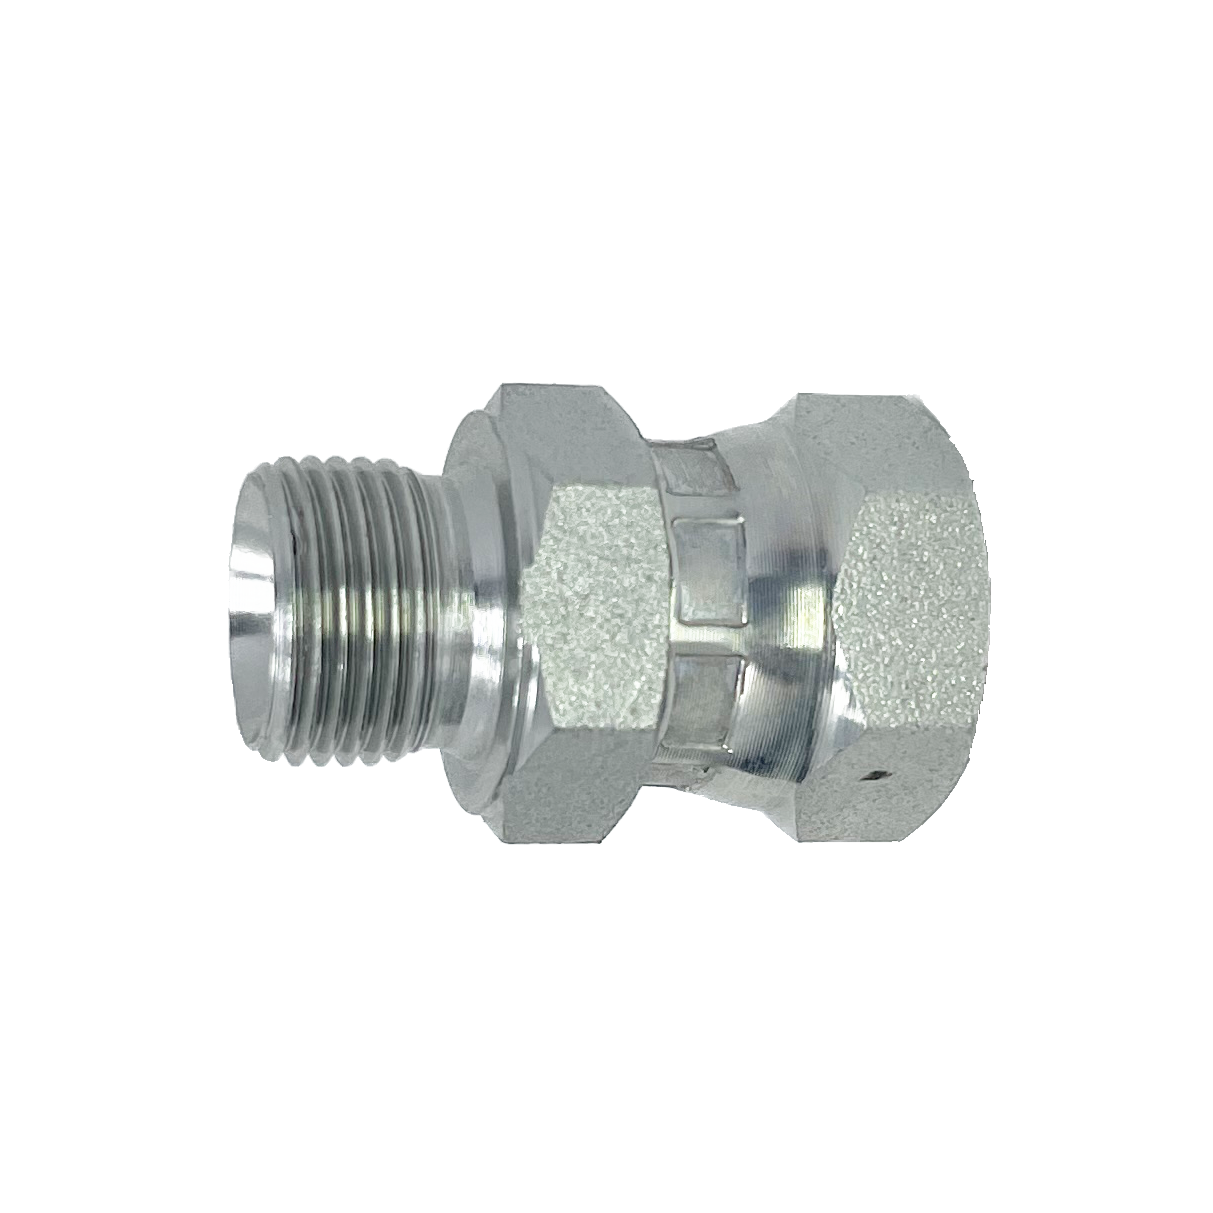 9015-06-06 : Adaptall Straight Adapter, Male 0.375 (3/8") BSPP x Female 0.375 (3/8") BSPP, Carbon Steel